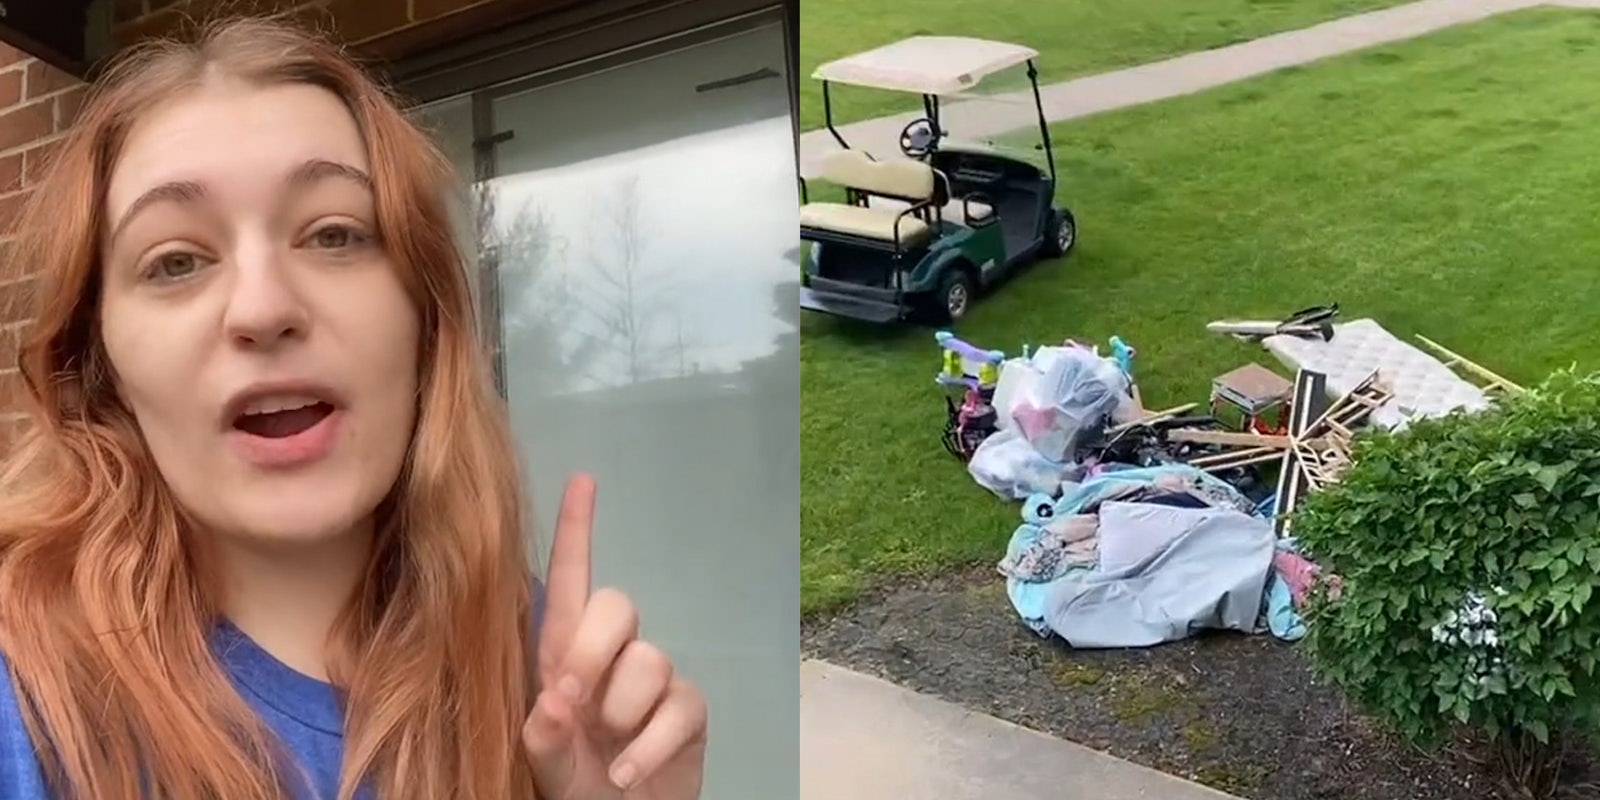 young woman pointing up (l) golf cart next to belongings thrown onto ground (r)